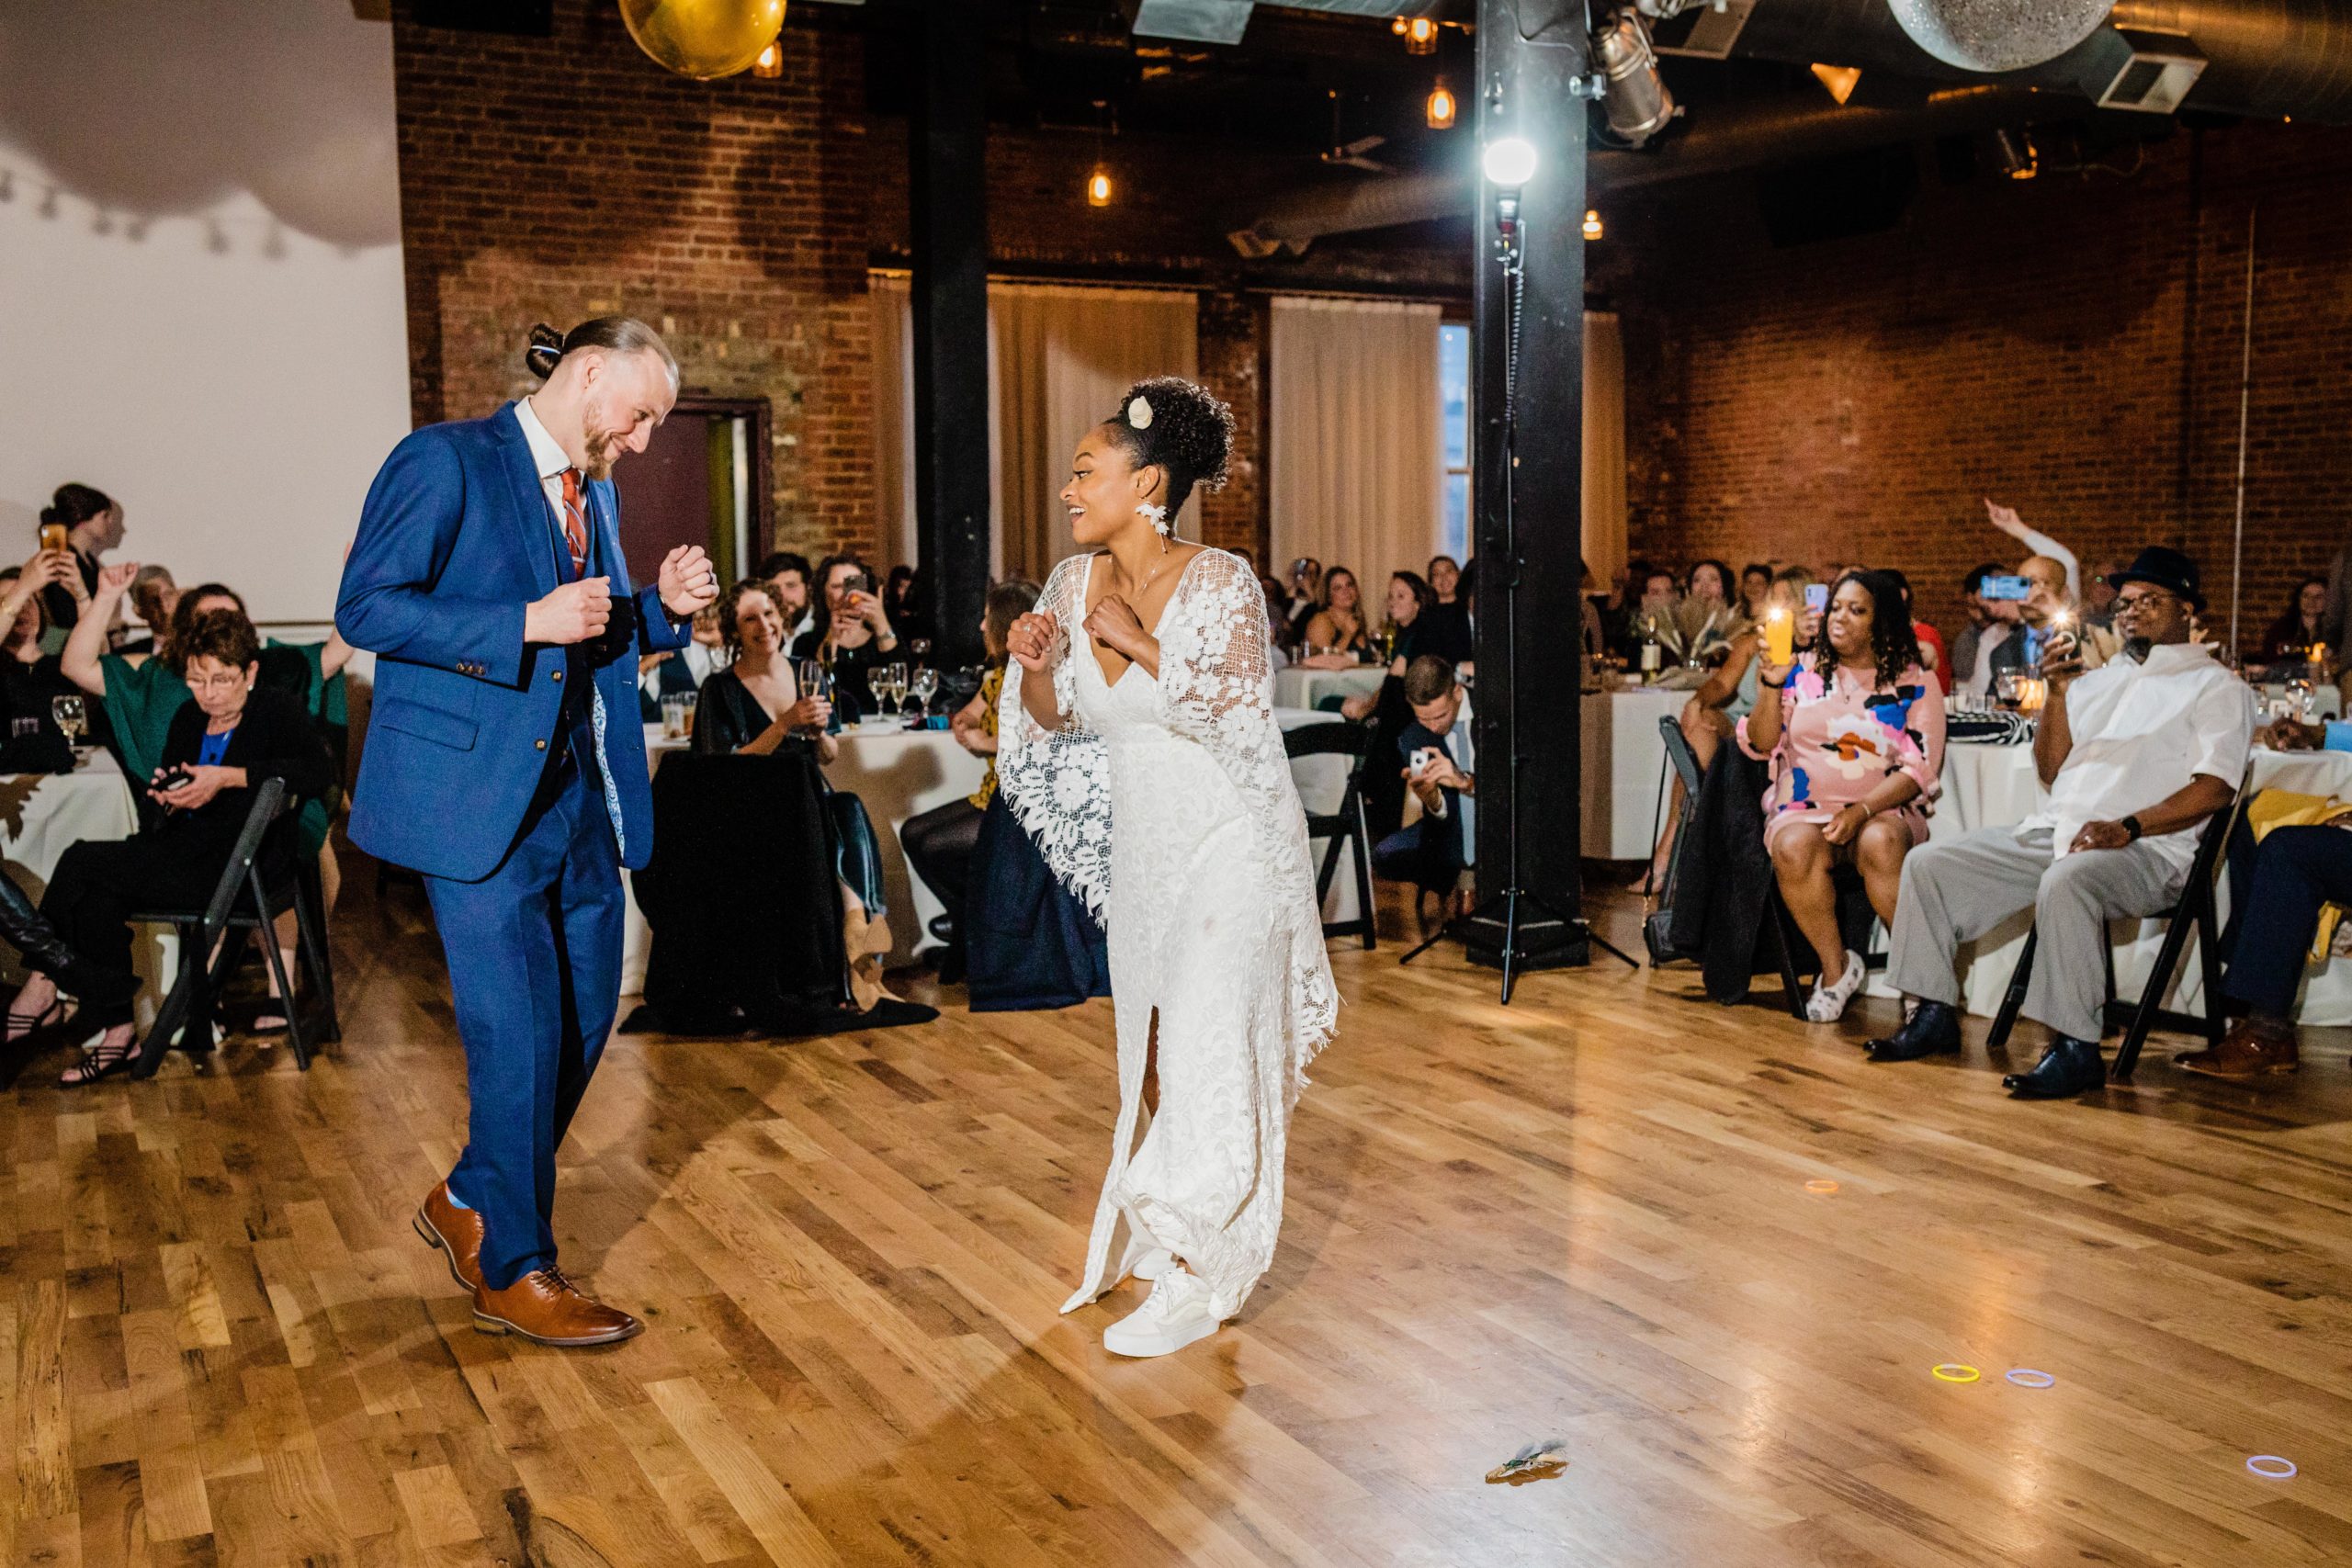 Bride and groom share a first dance at their Bottom Lounge Wedding